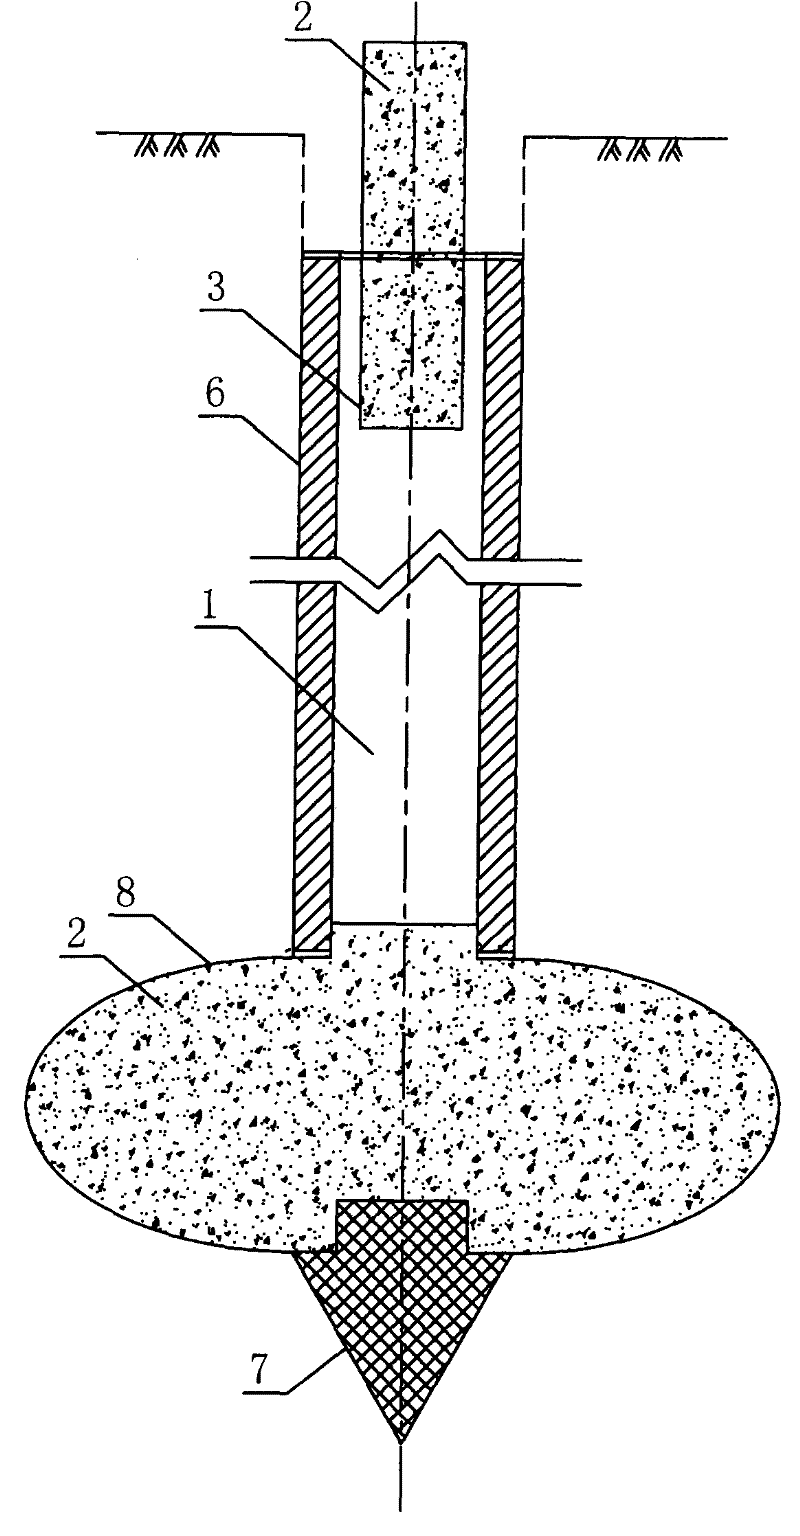 Construction method for concrete bagged pouring in small-diameter pile hole